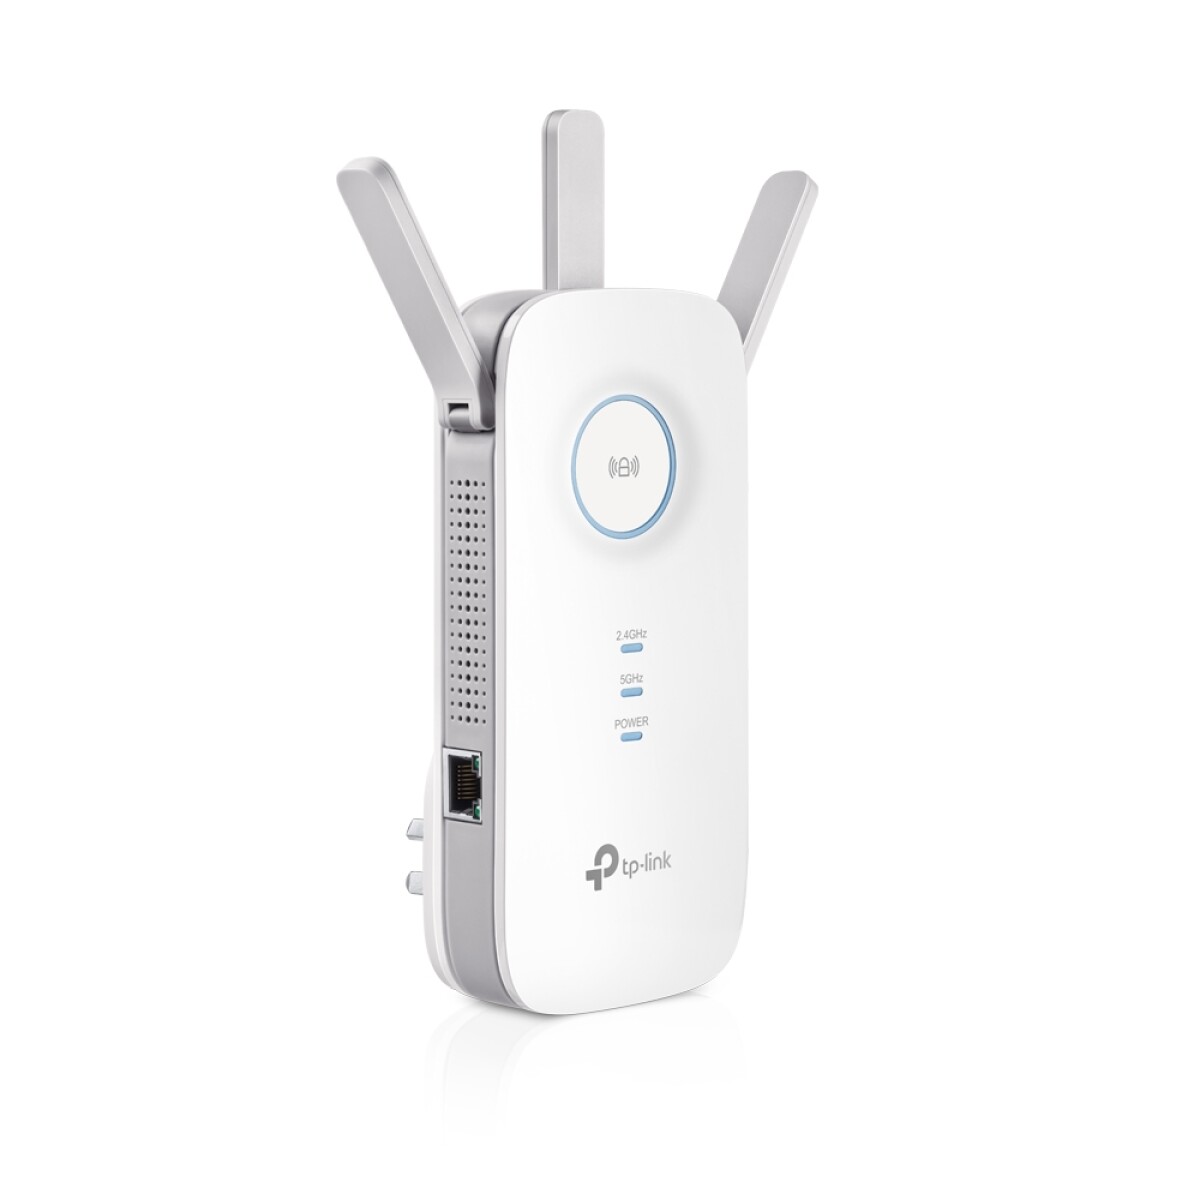 Access Point, Repetidor Tp-link Re450 Blanco 